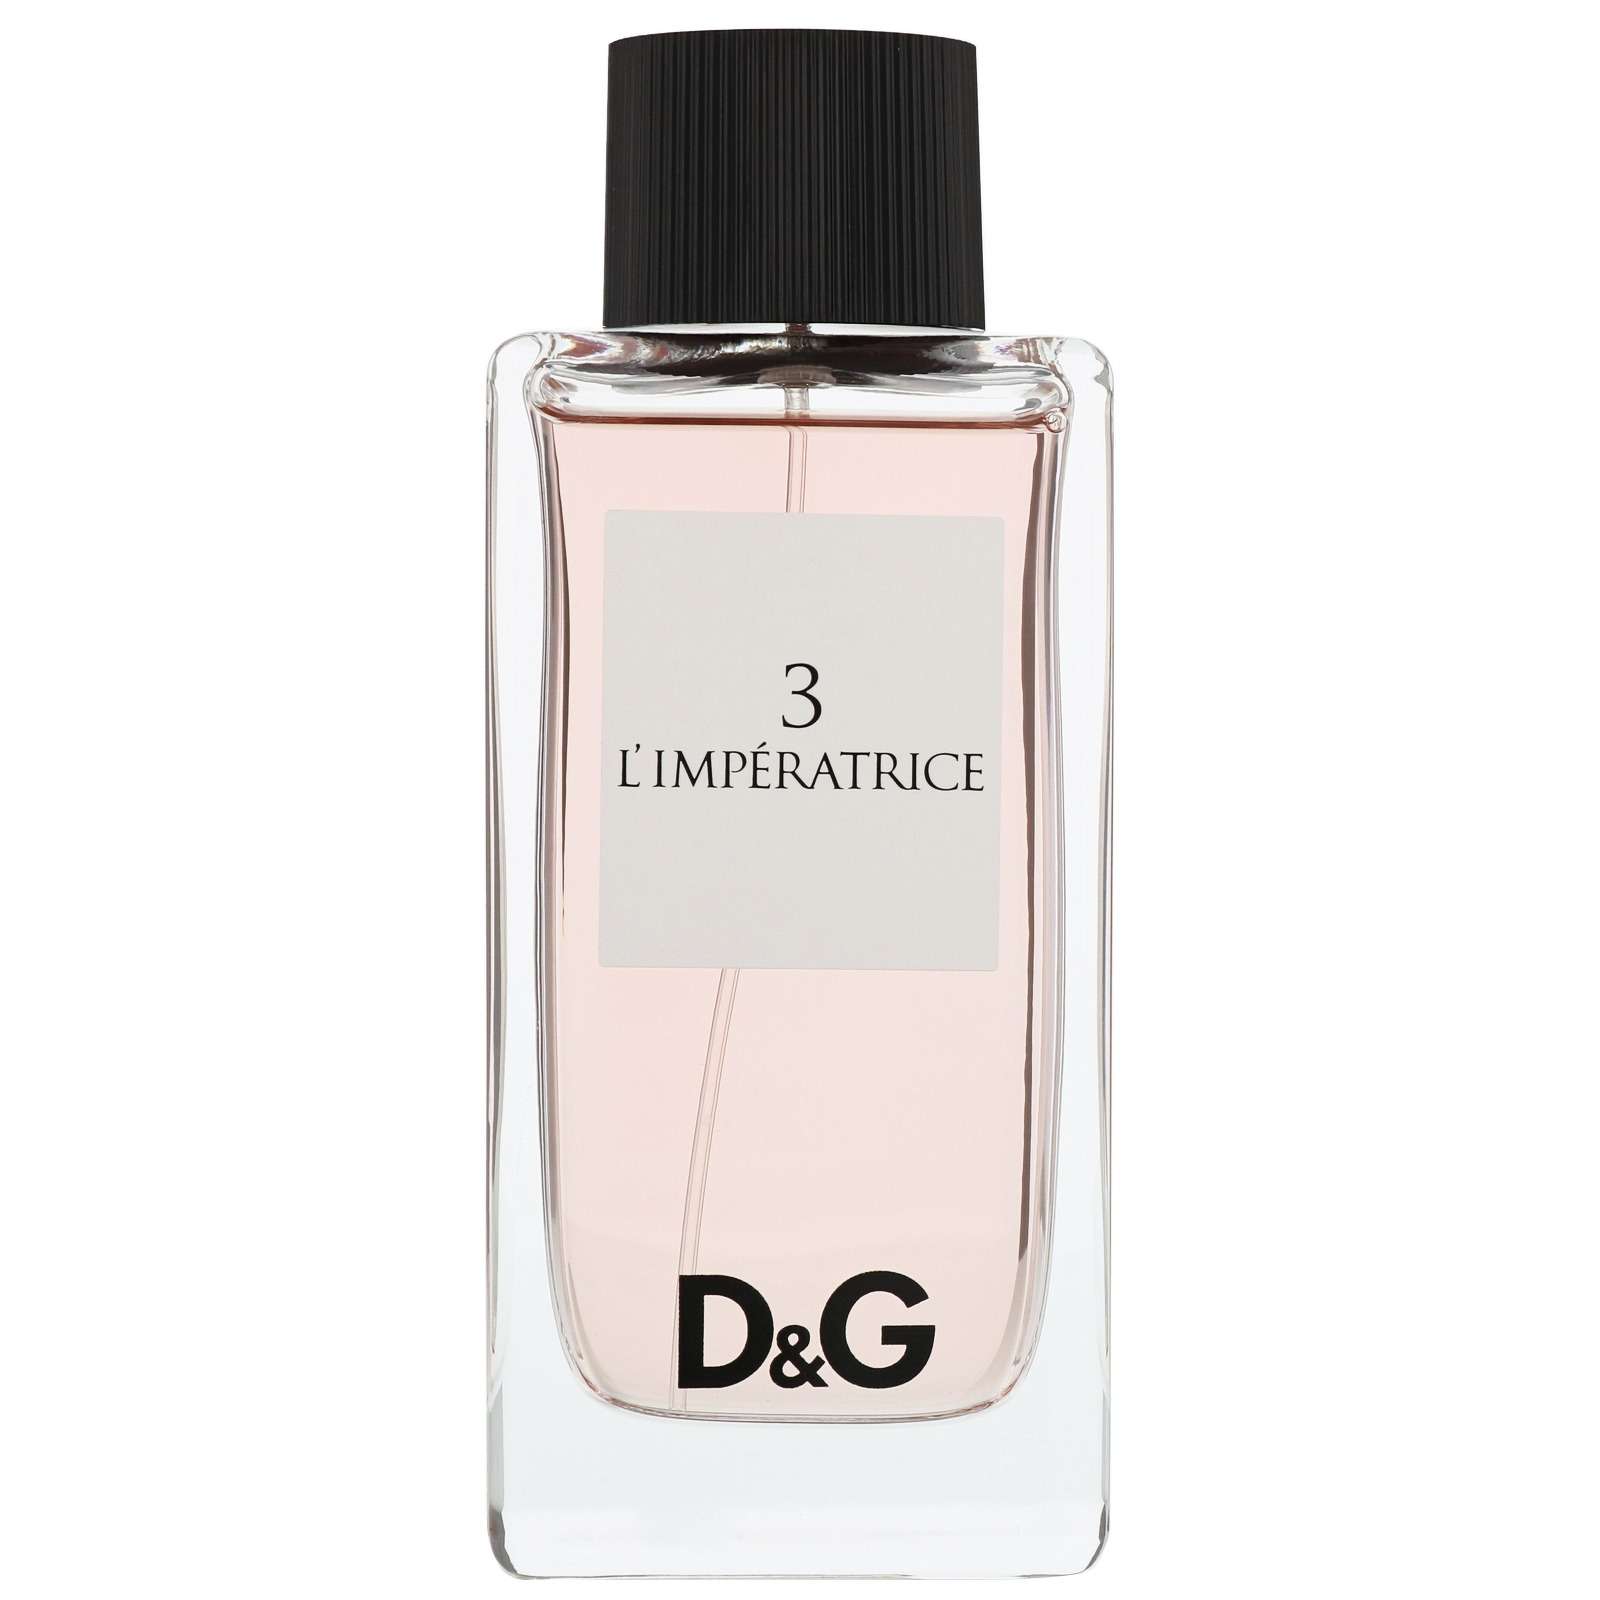 72713-dolce-gabbana-no-3-limperatrice 